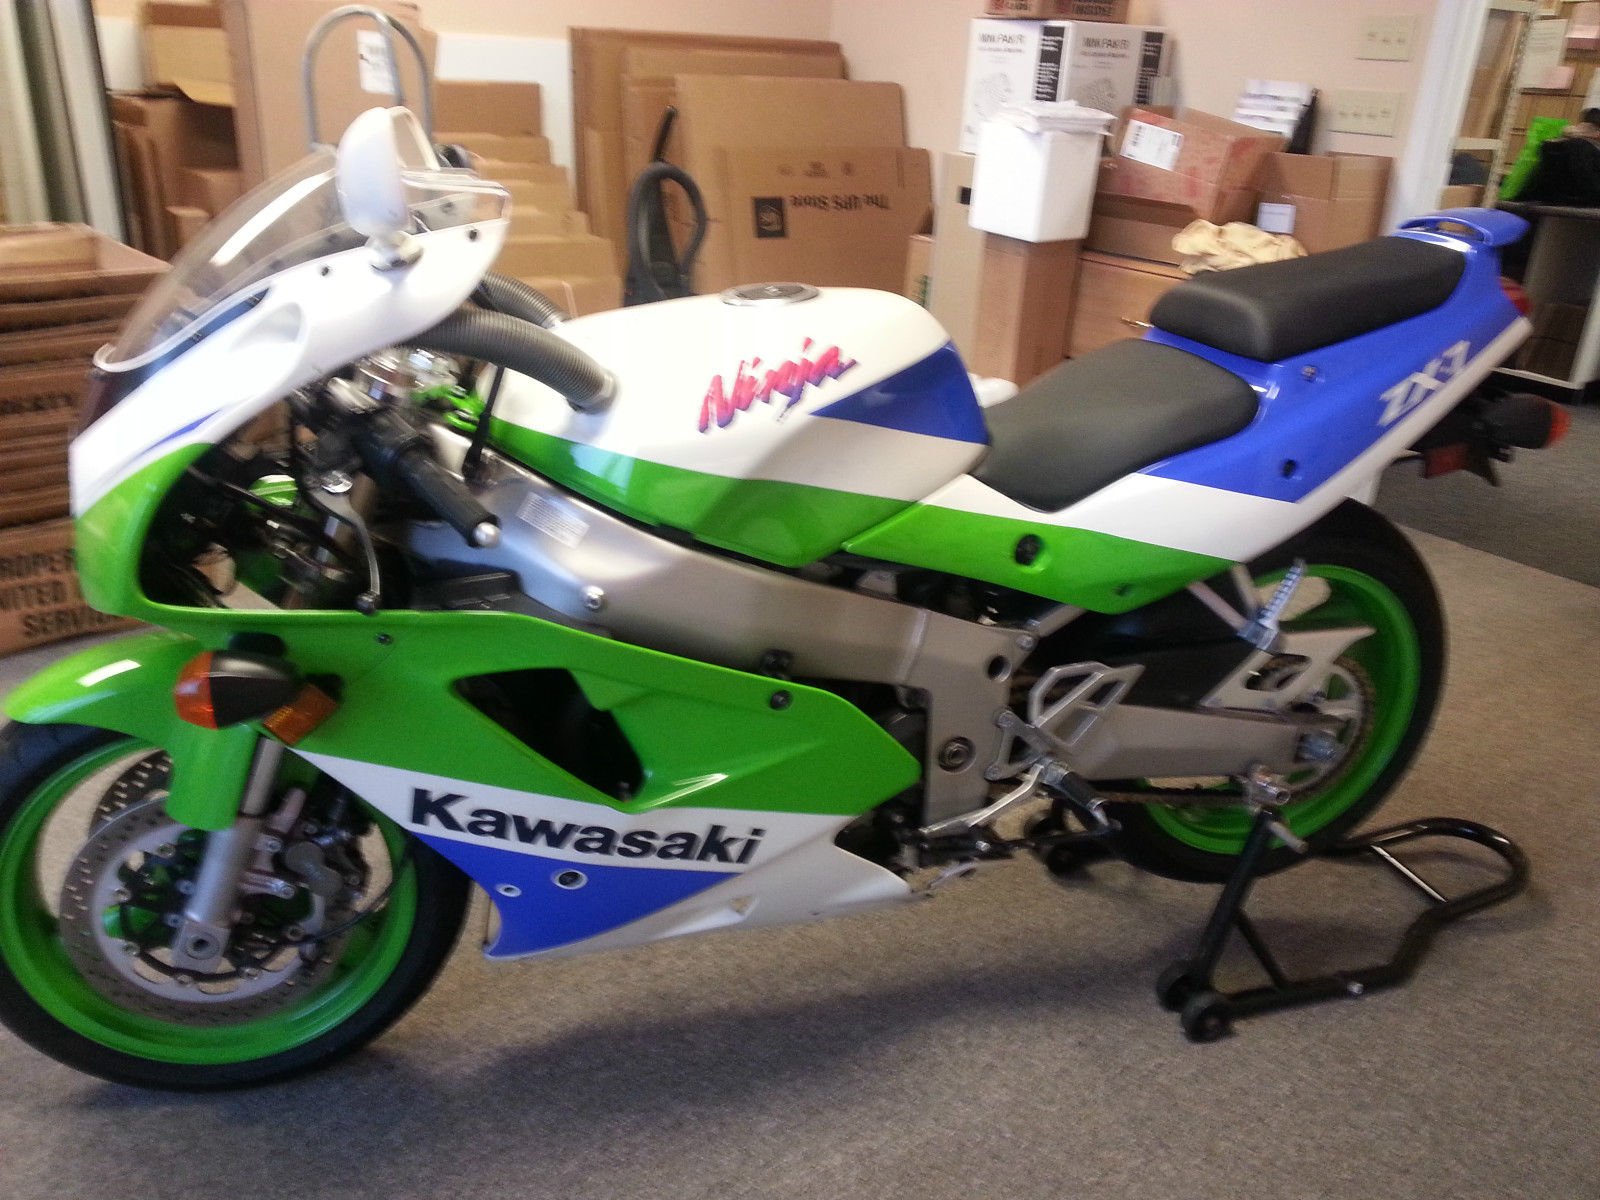 ZX-7 Archives - Page 2 of 3 - Rare SportBikes For Sale